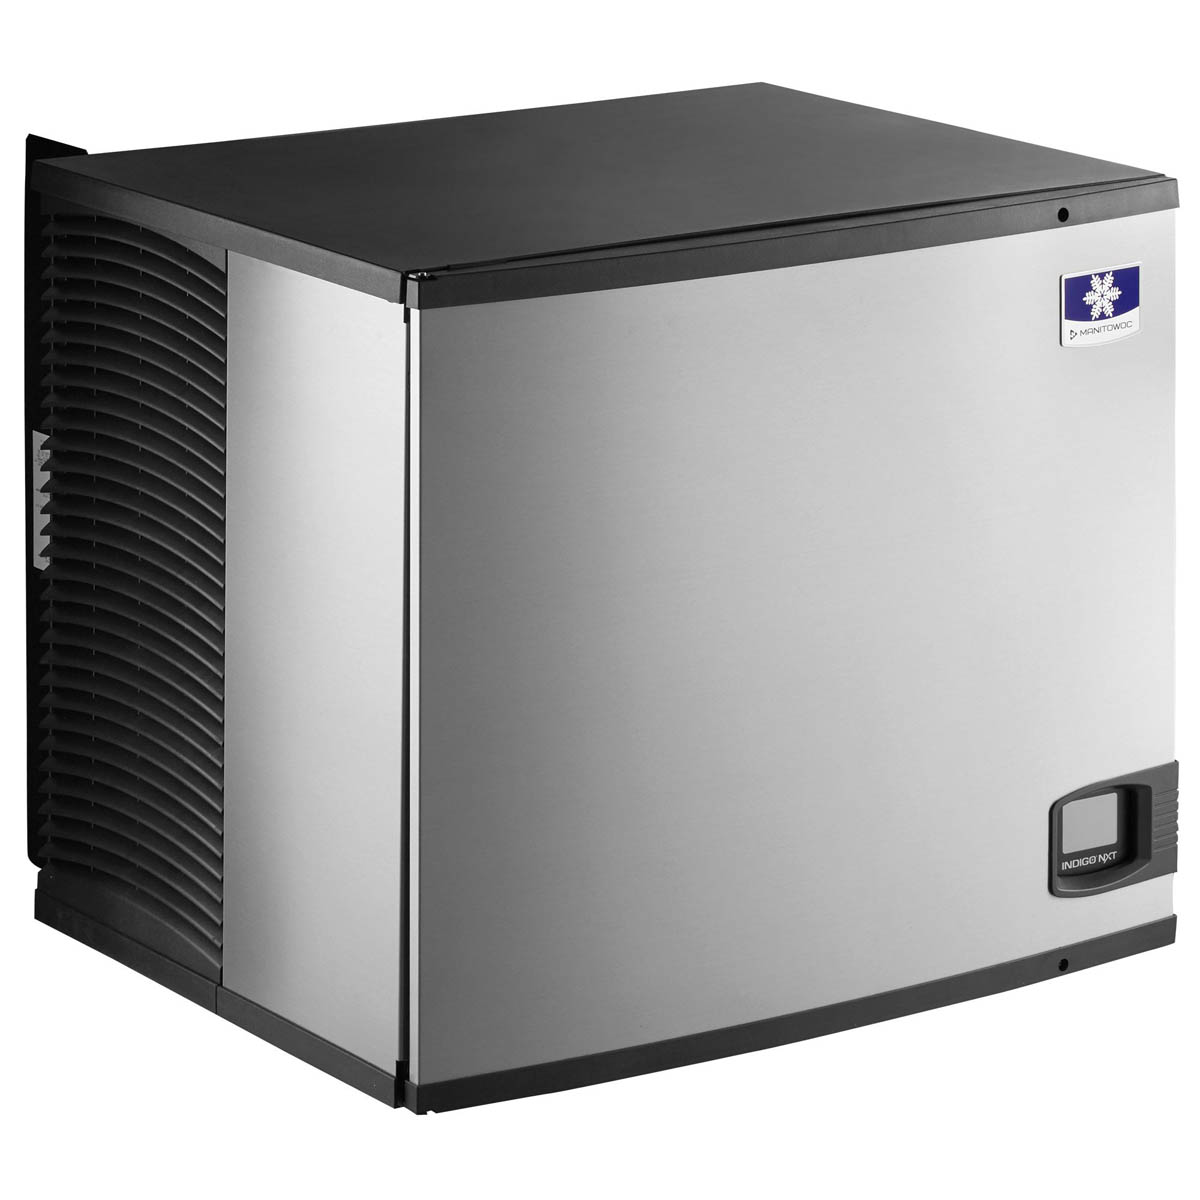 Manitowoc IDT0900A 30″ Cube-Style Indigo Nxt™ Series Ice Maker, Air-Cooled, 851 lbs/Day